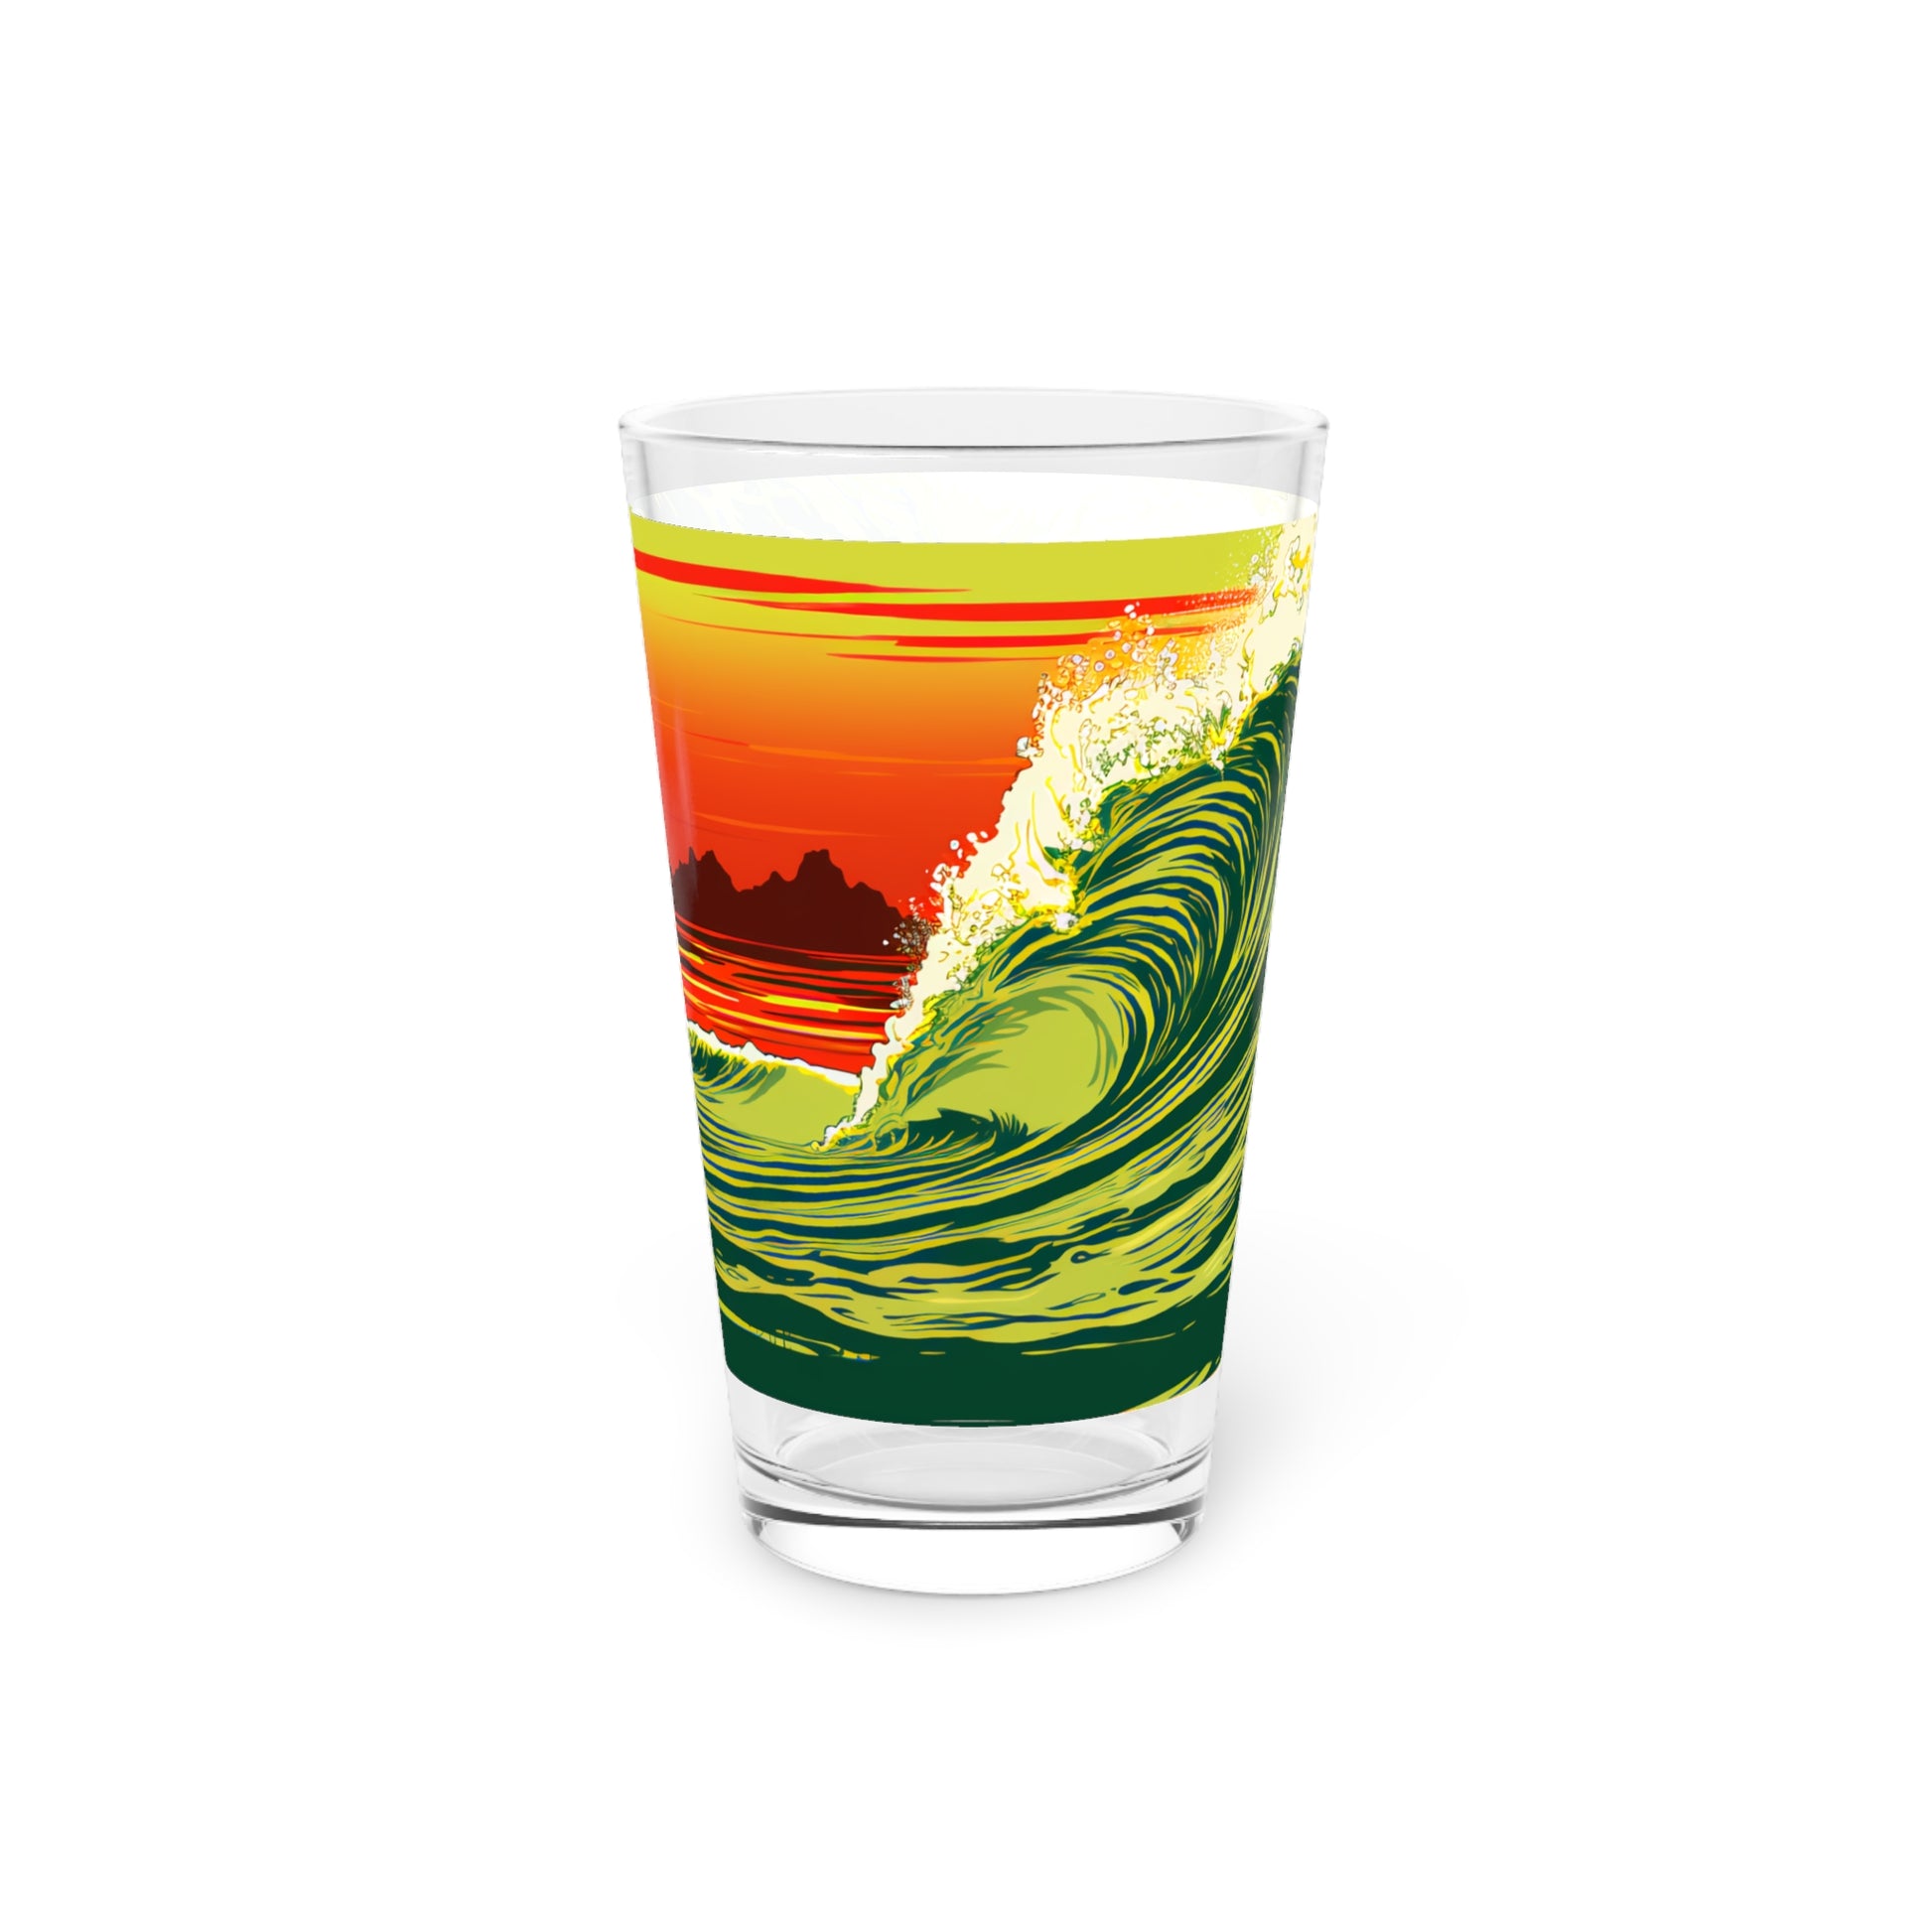 Surfing in Hawaii Wave Art Pint Glass 16oz - Waves Design #040: Experience the spirit of Hawaii's waves with our vibrant and stylish pint glass.